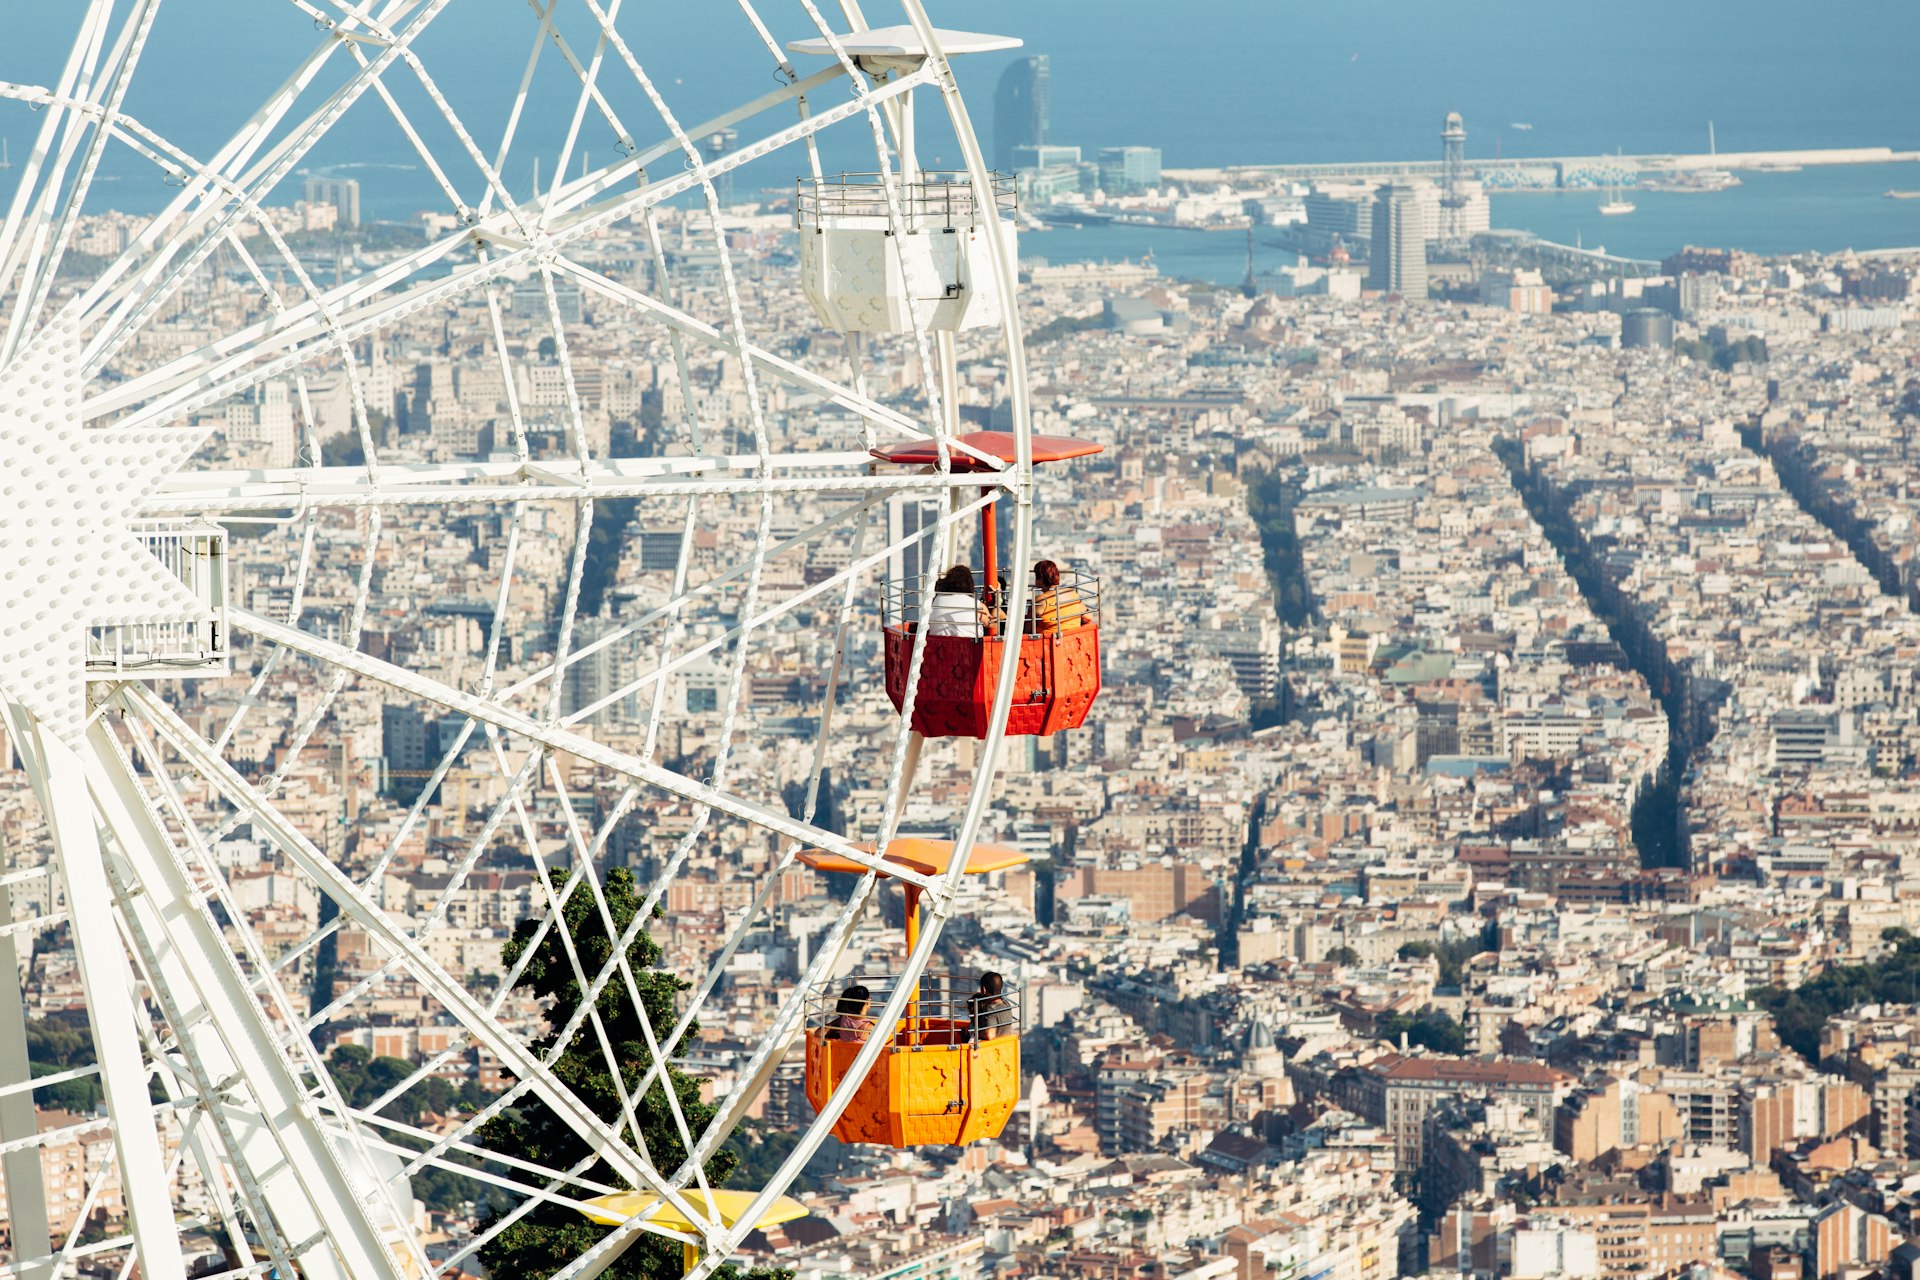 An aerial view of a ferris wheel with brightly colored cars overlooking all of Barcelona